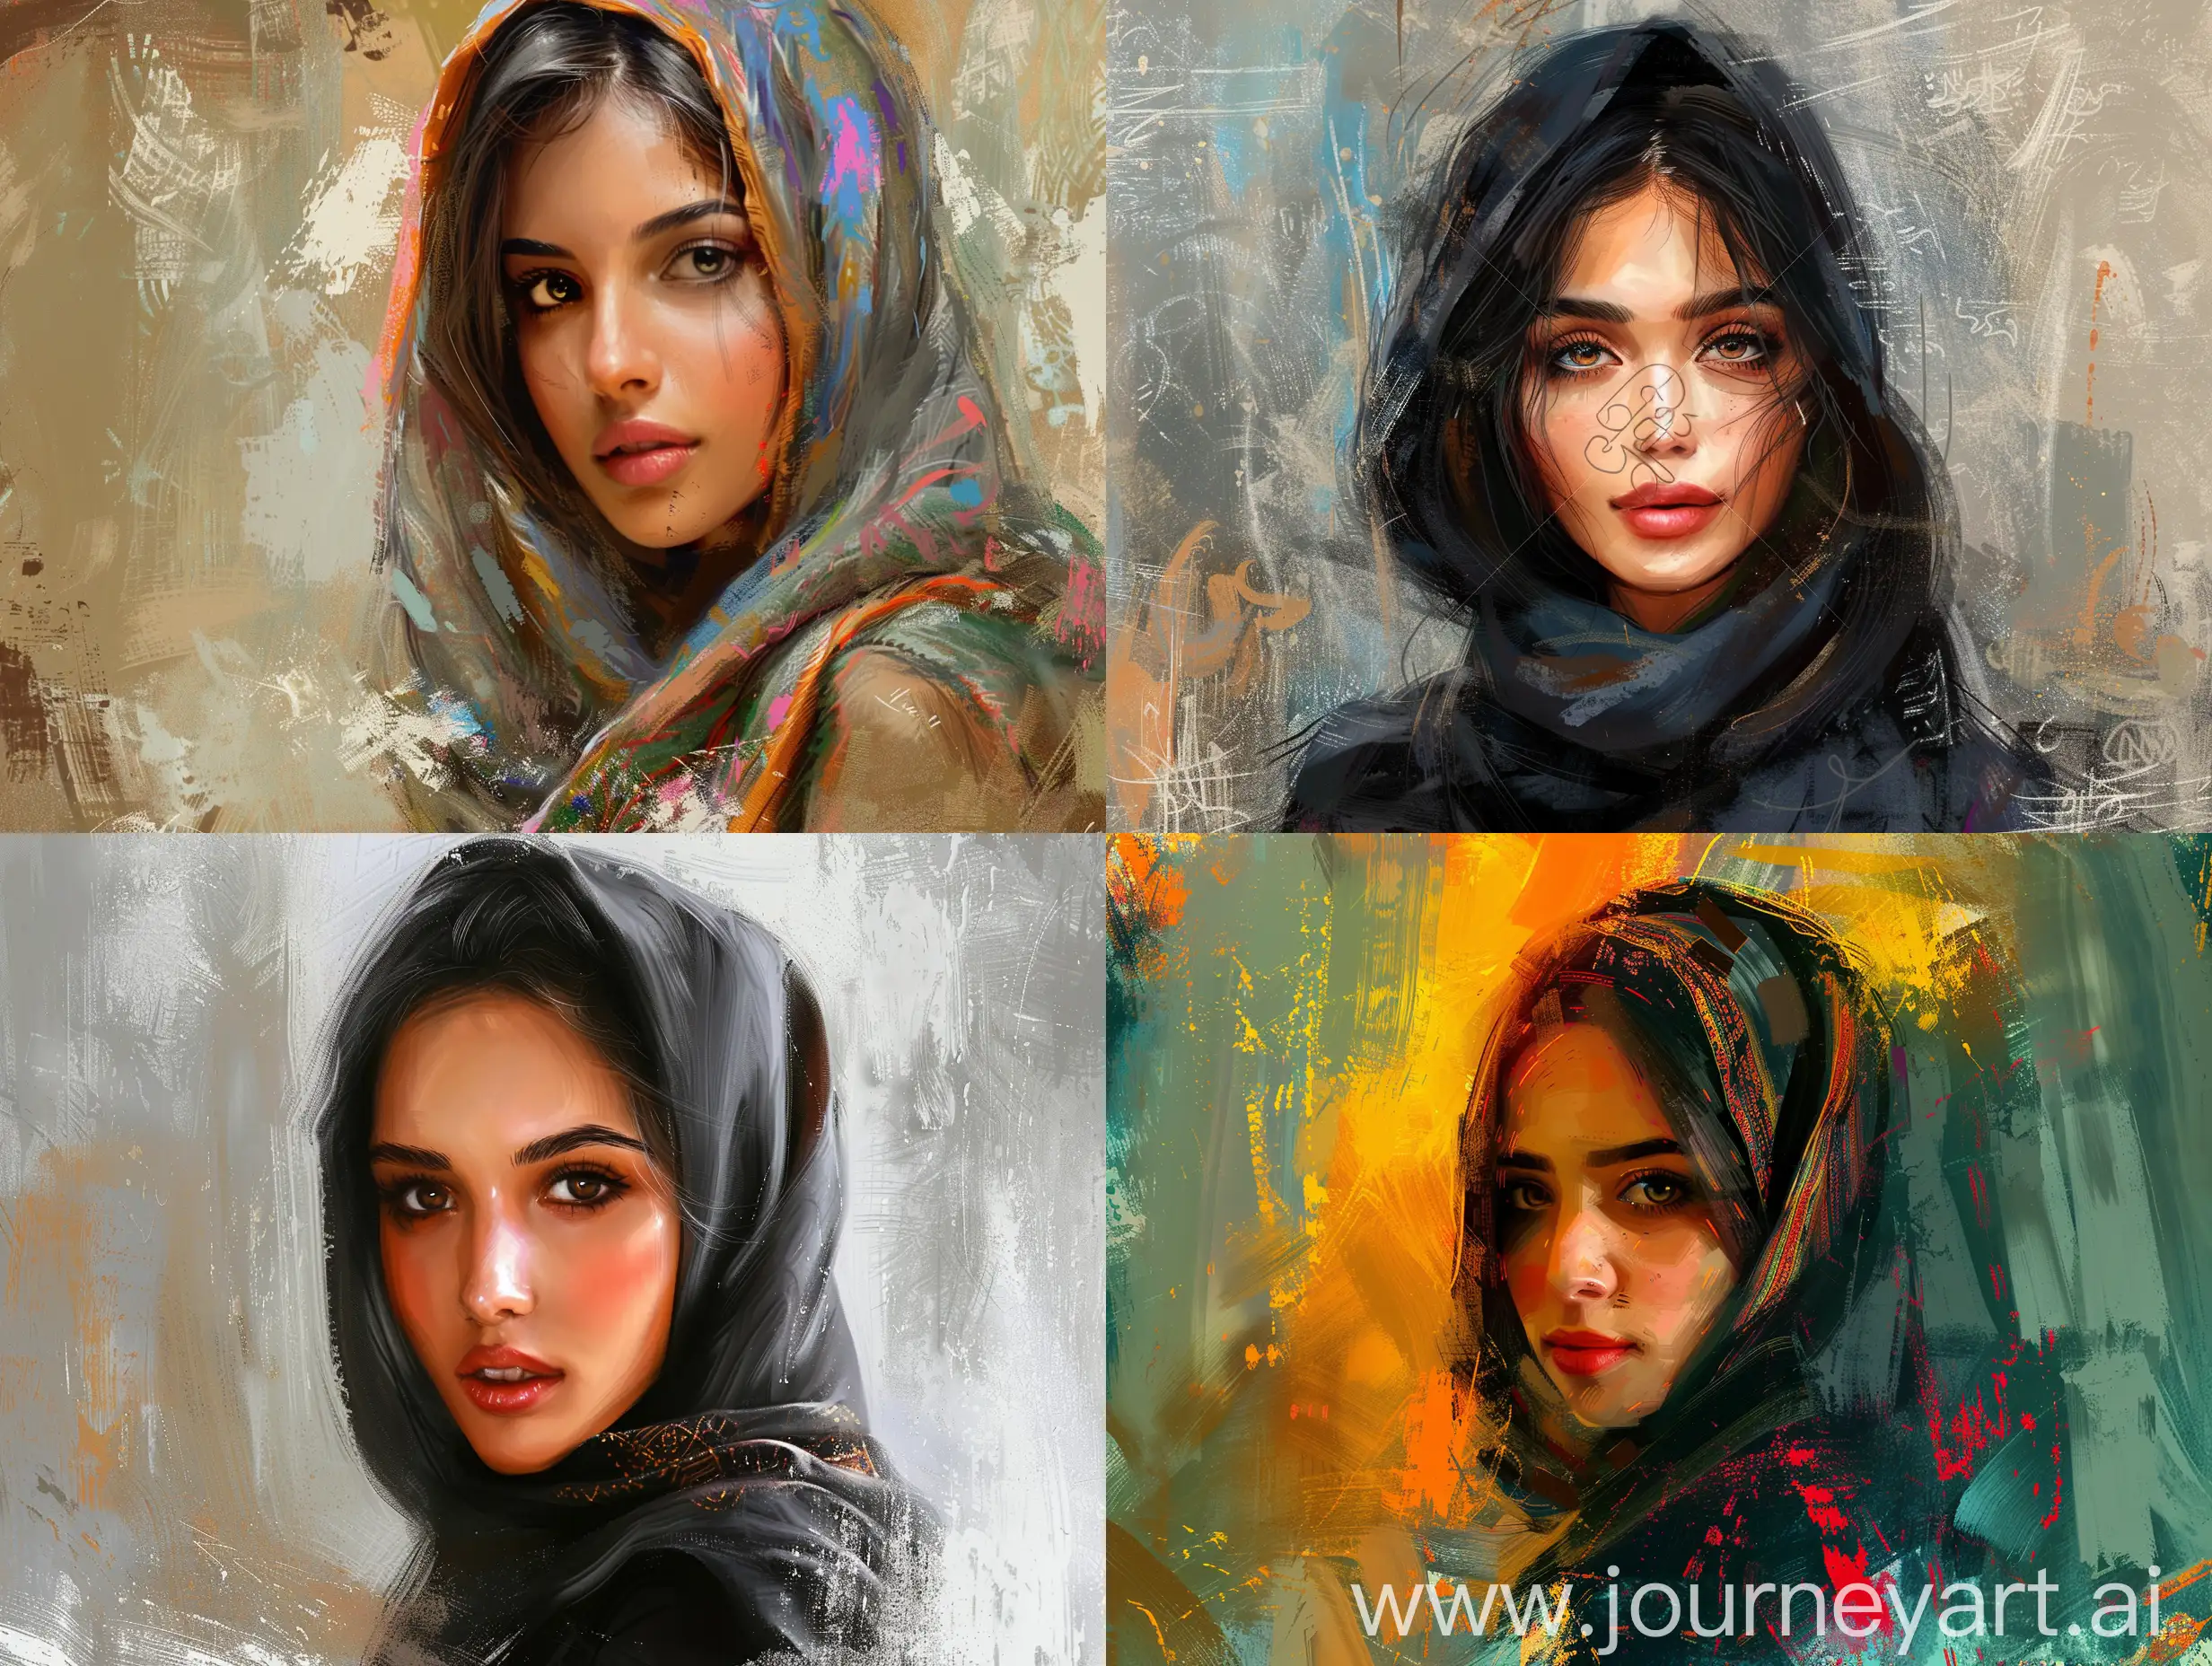 A digital painting of a hot charming iranian girl which painted by photoshop brushes